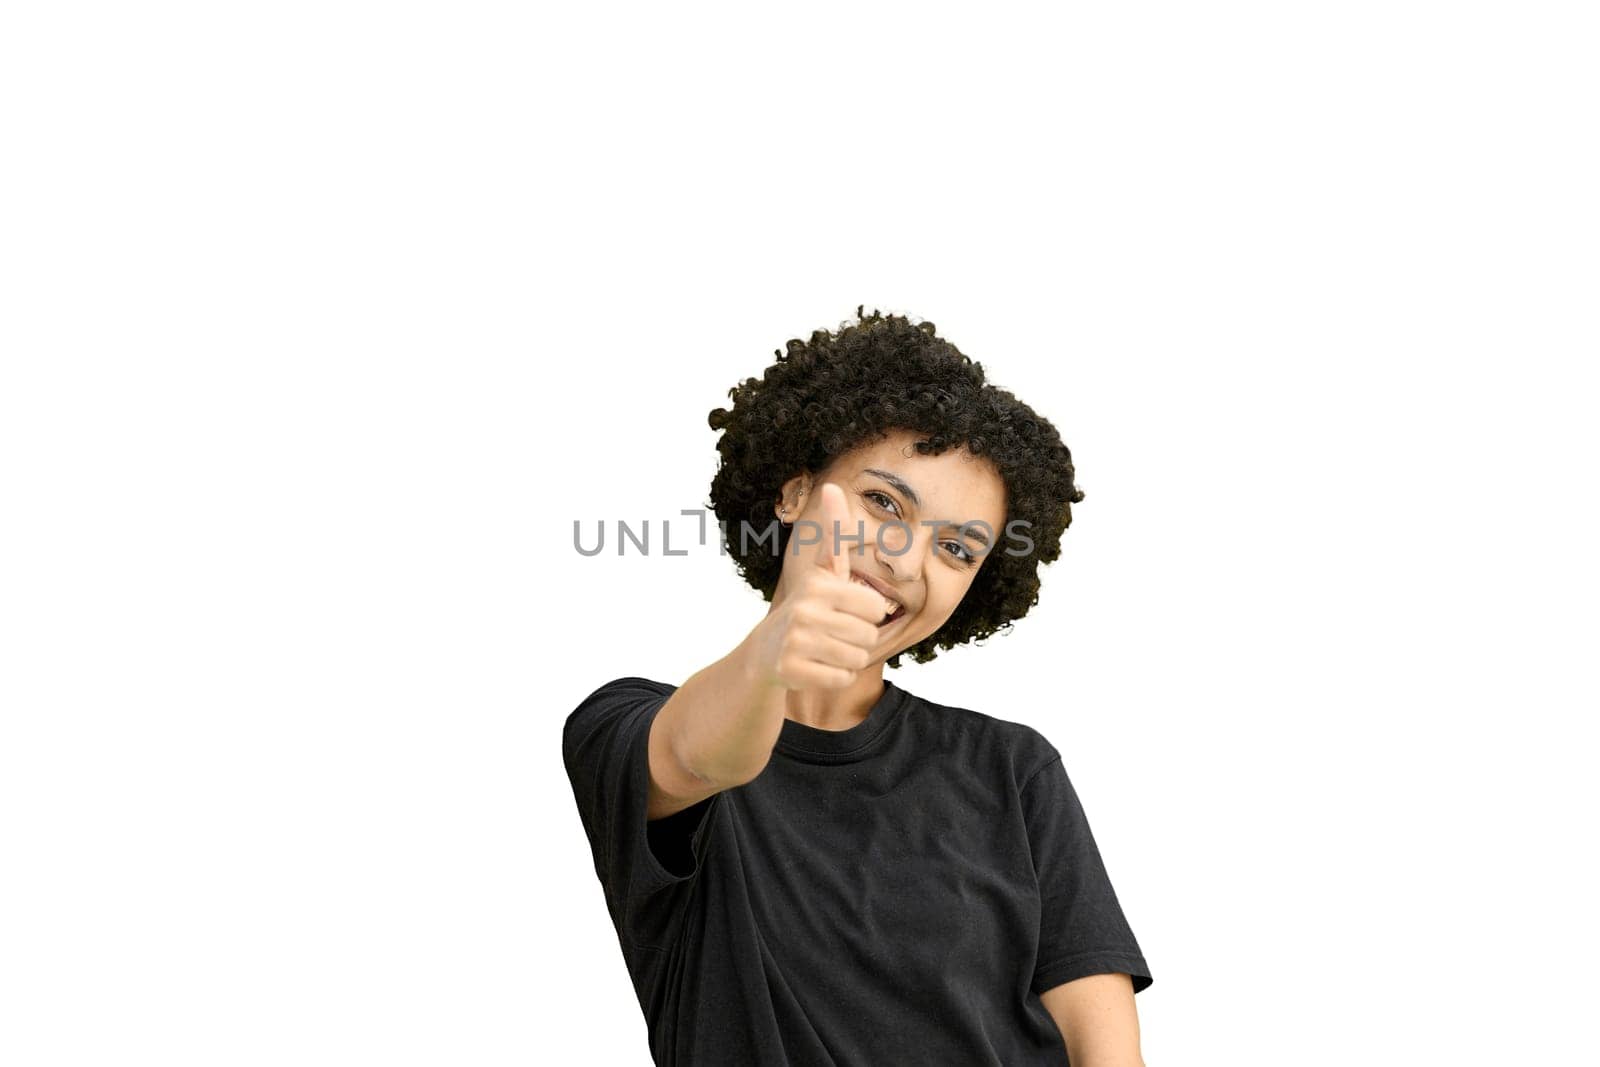 A woman, close-up, on a white background, shows her thumbs up.